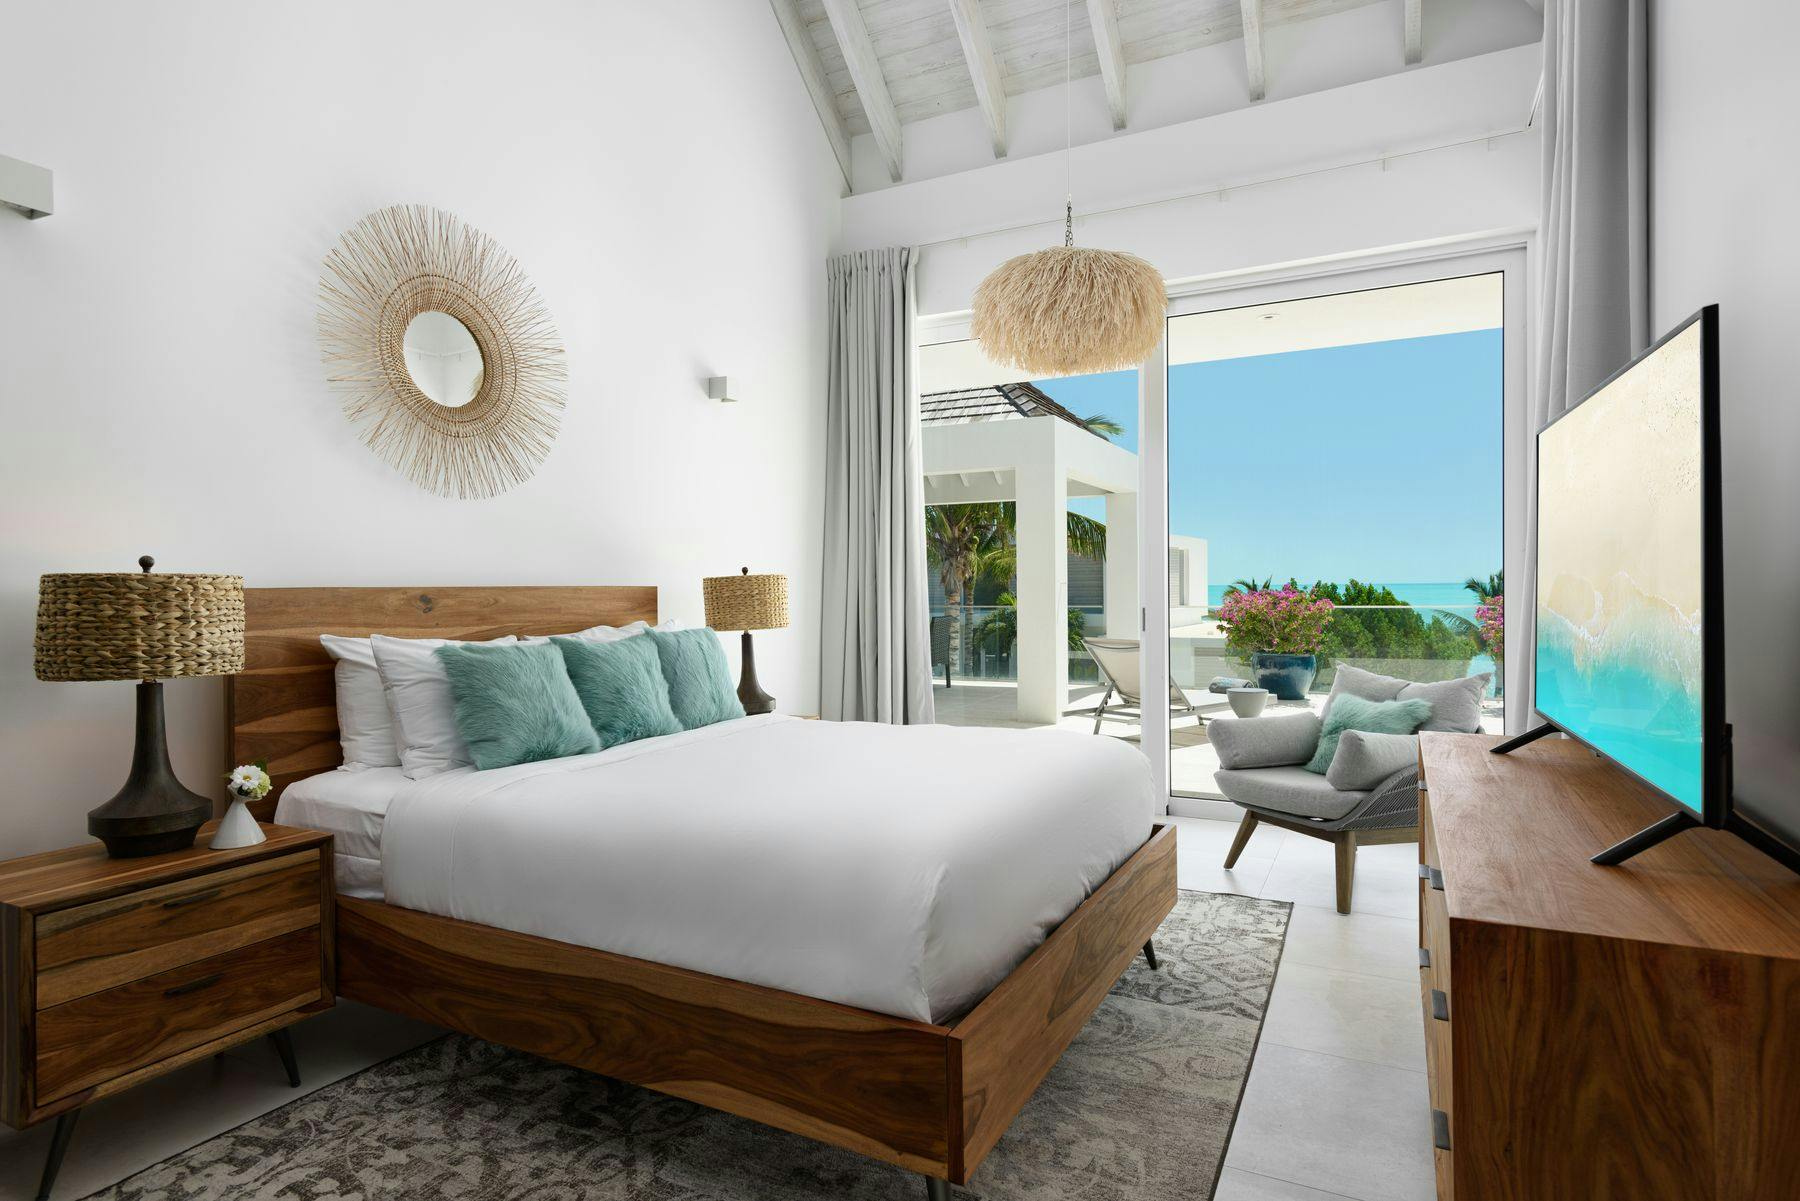 Primary bedroom with a view in a Turks and Caicos vacation rental.